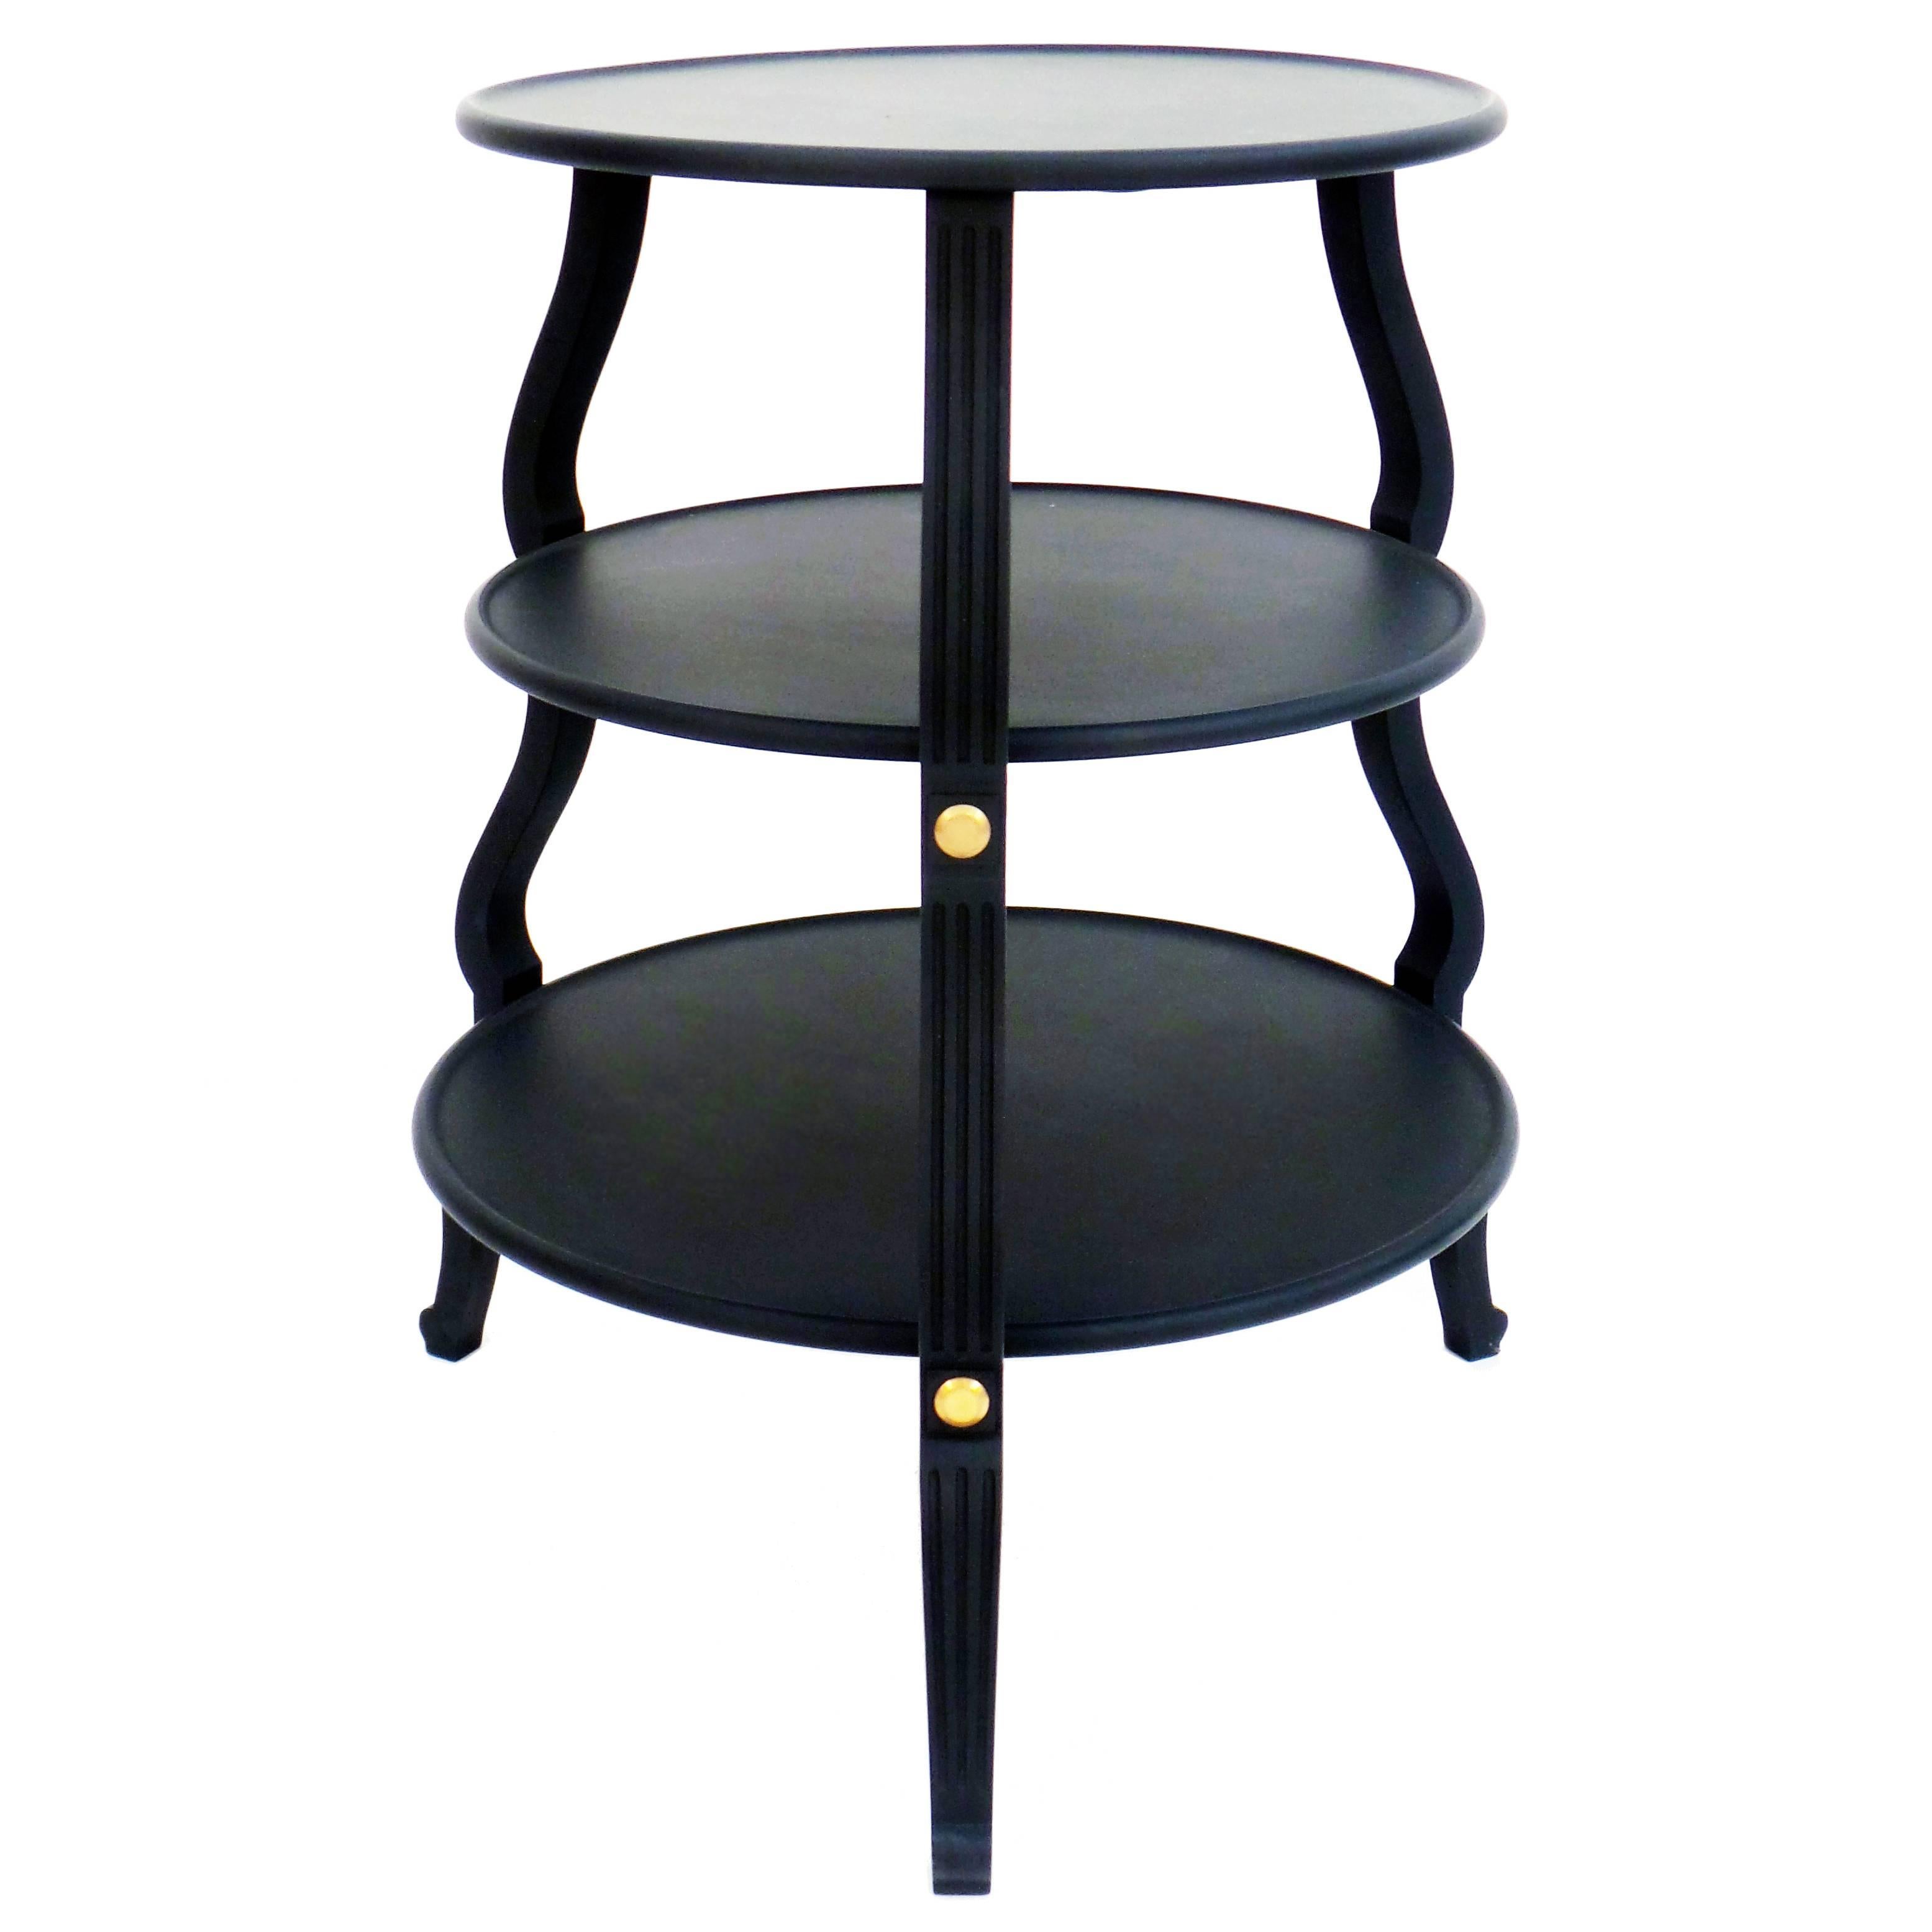 Circular Three-Tier Table For Sale